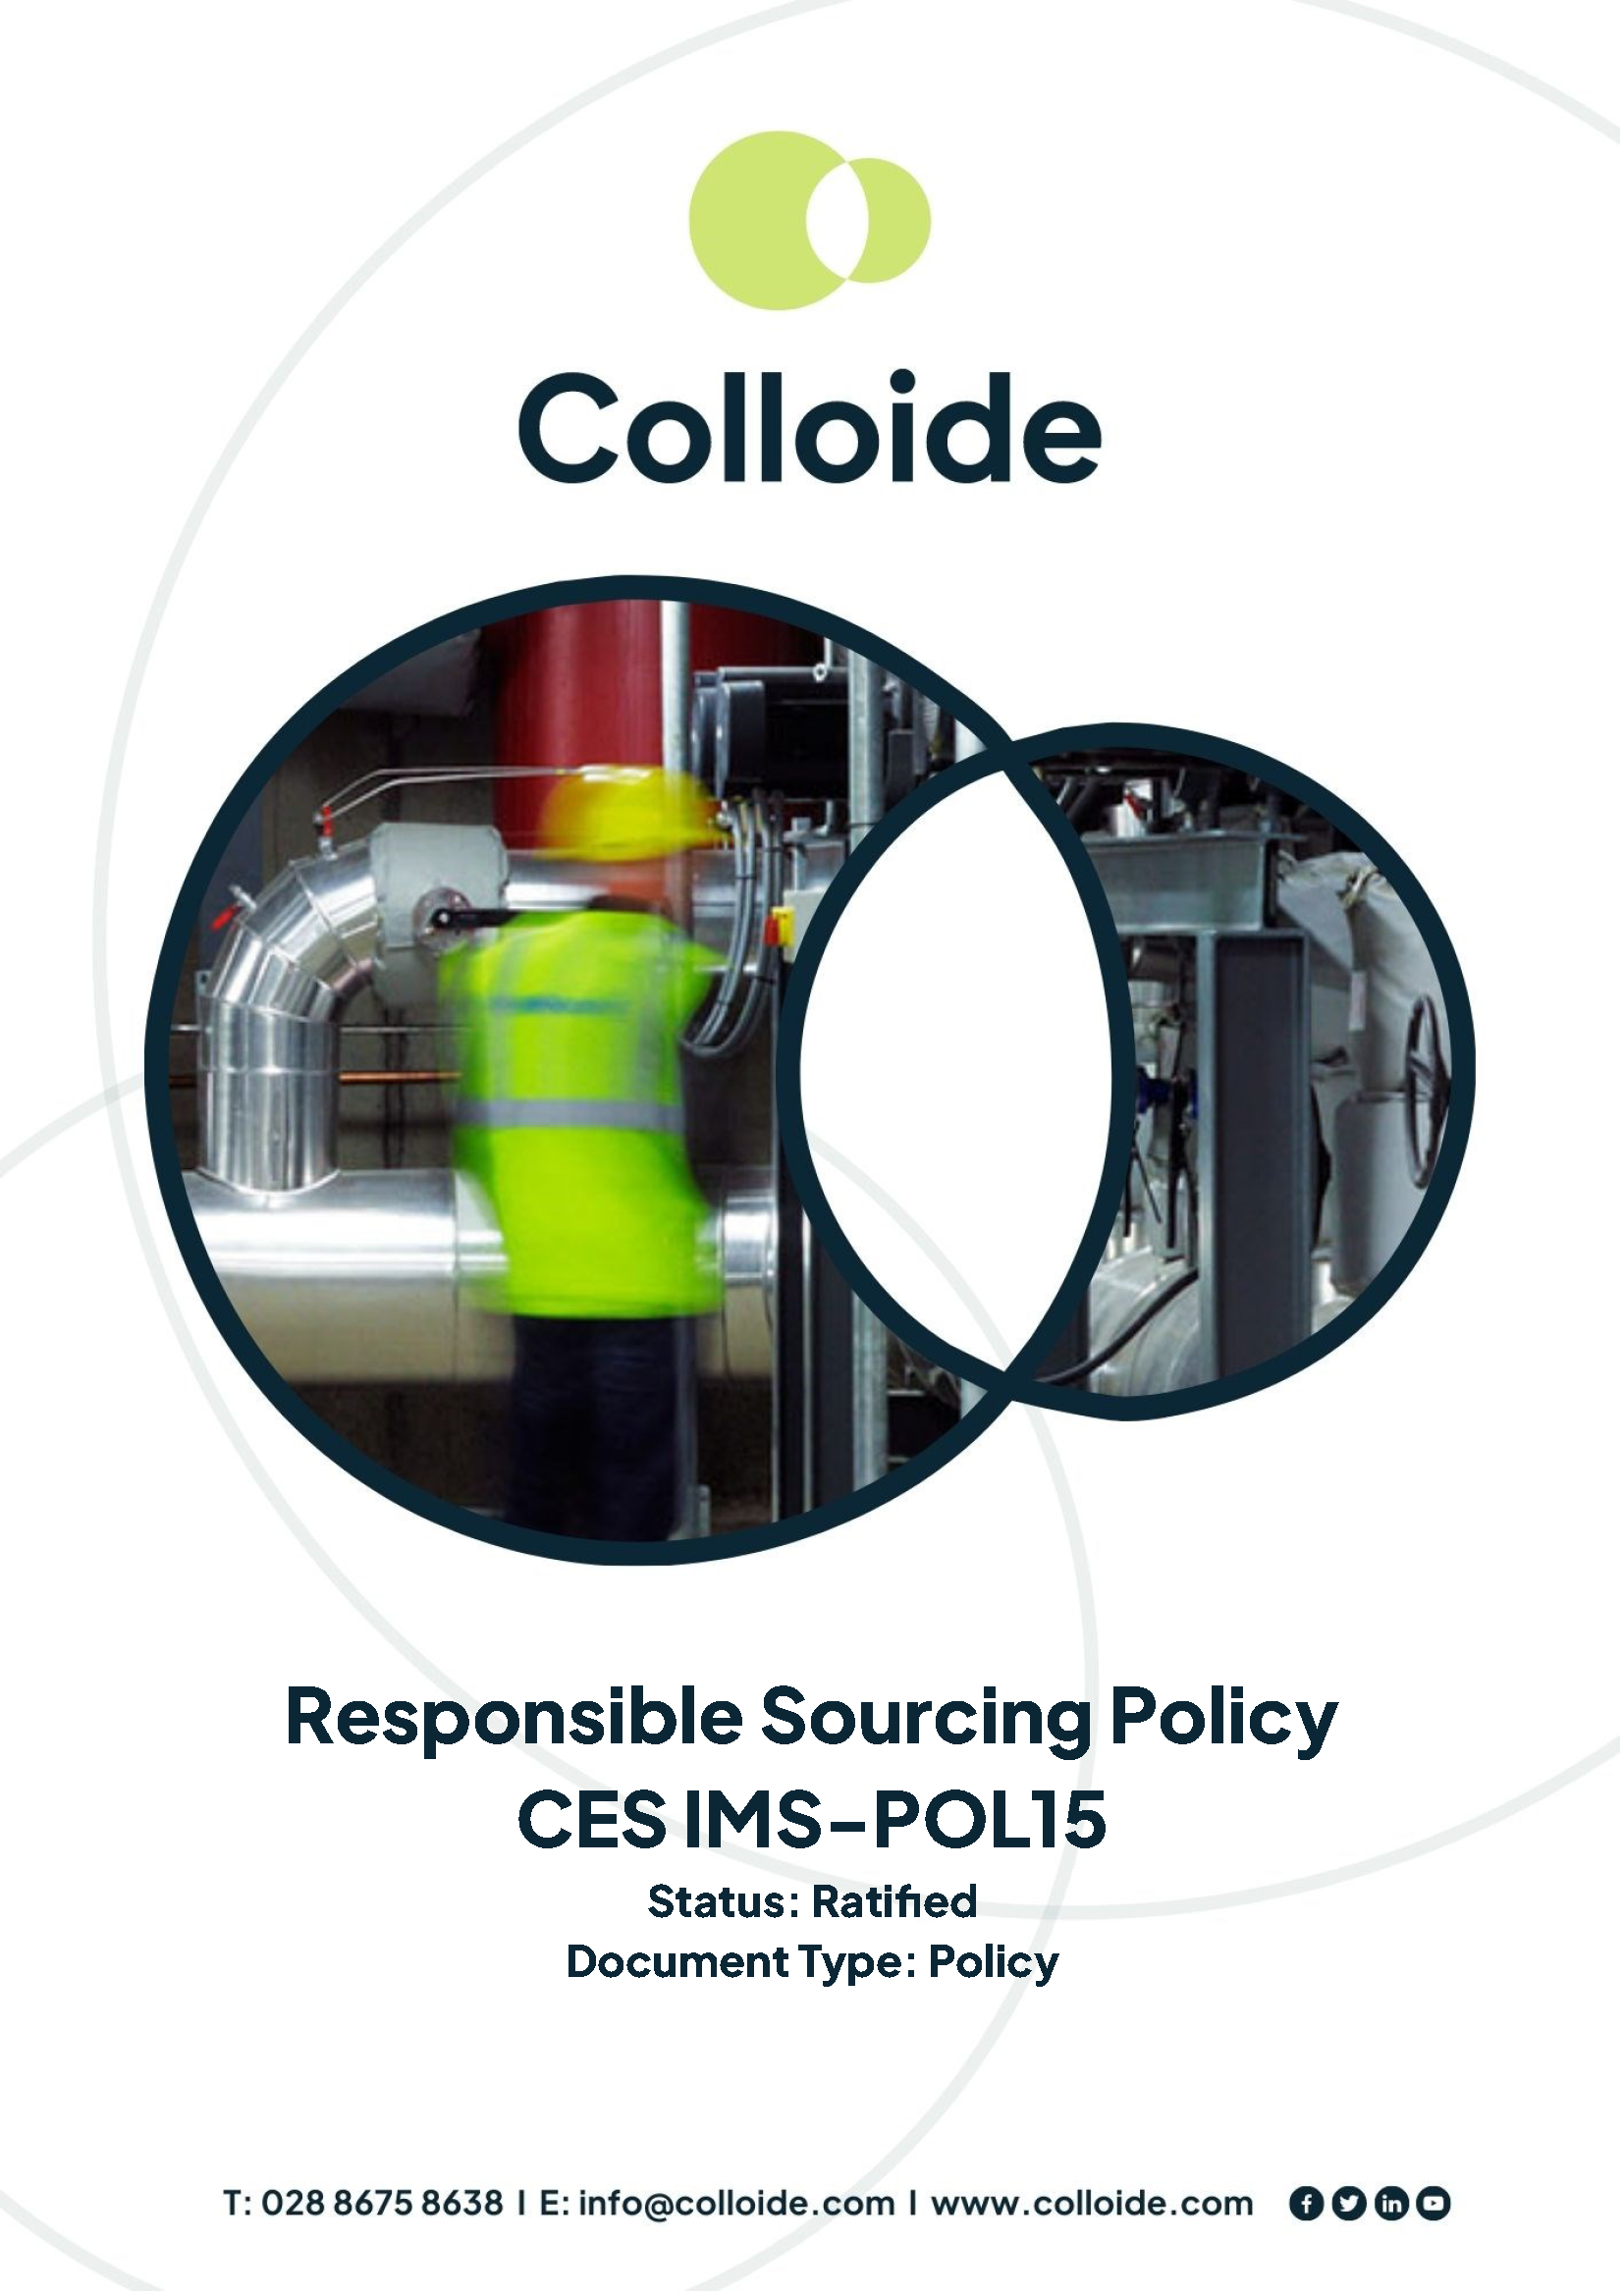 Cover Image for CES IMS-POL15 – Responsible Sourcing Policy